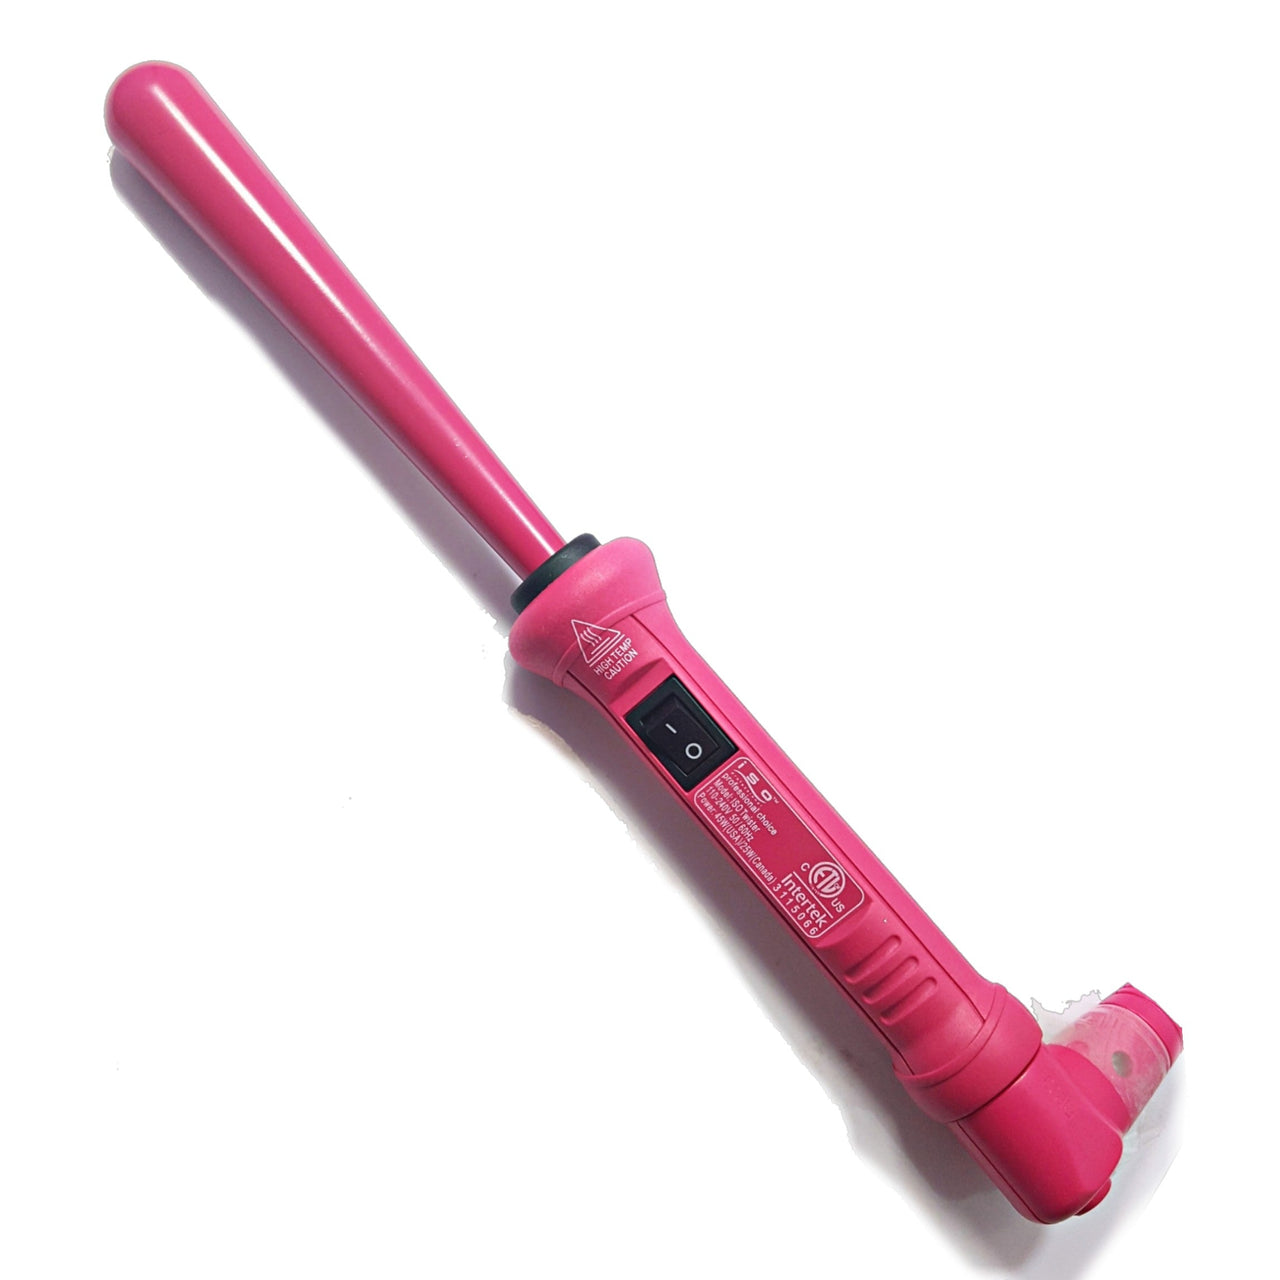 Tapered 13-25mm Tourmaline Ceramic Curling Iron Clipless Hair Twister Pink with Protective Glove